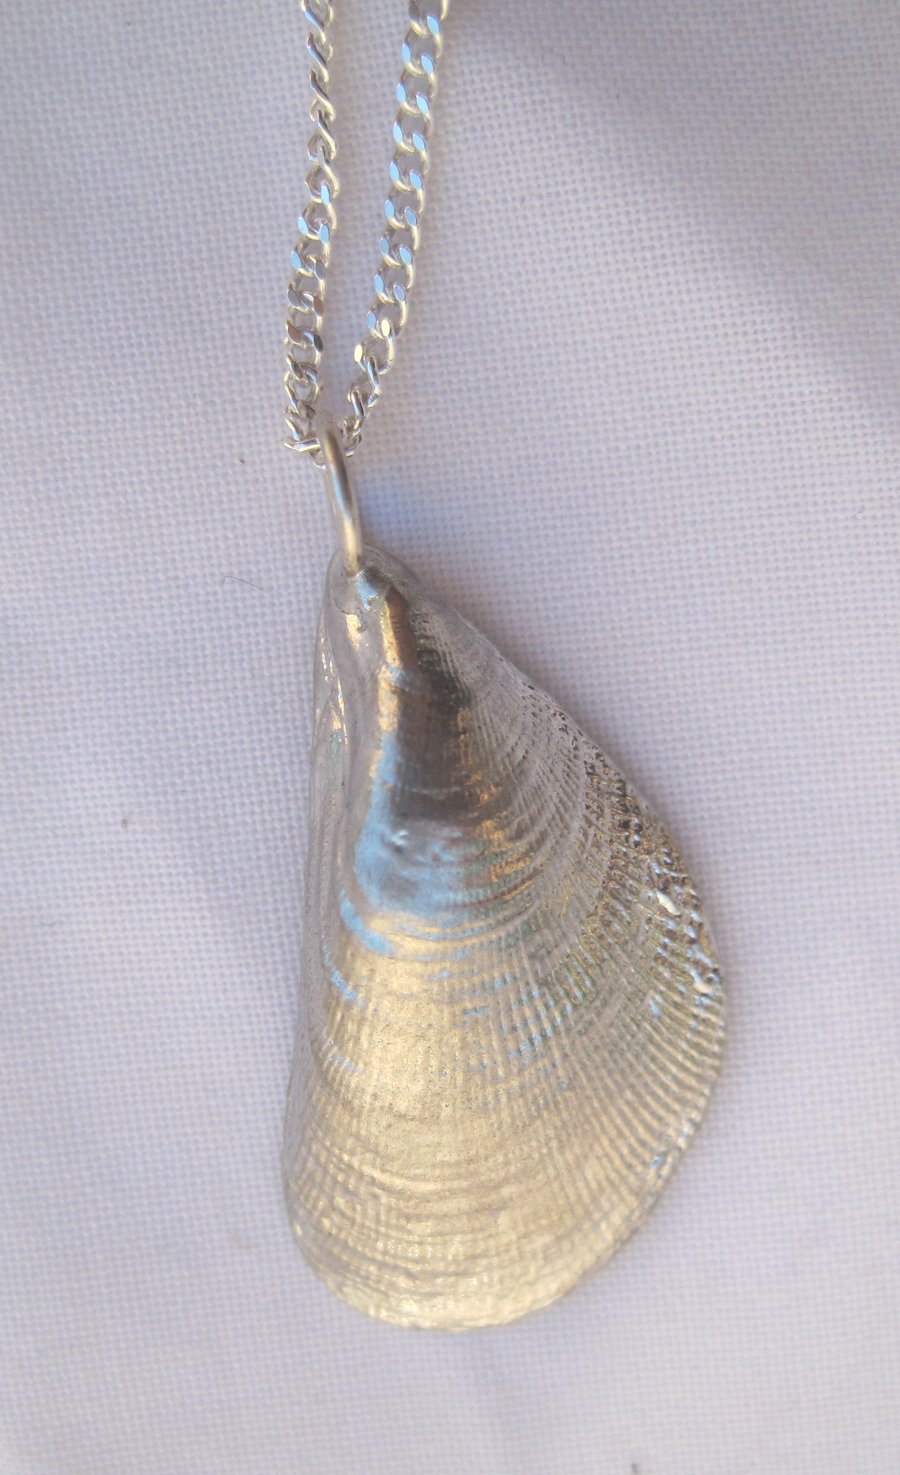 Textured mussel shell pewter pendant necklace with sterling silver chain